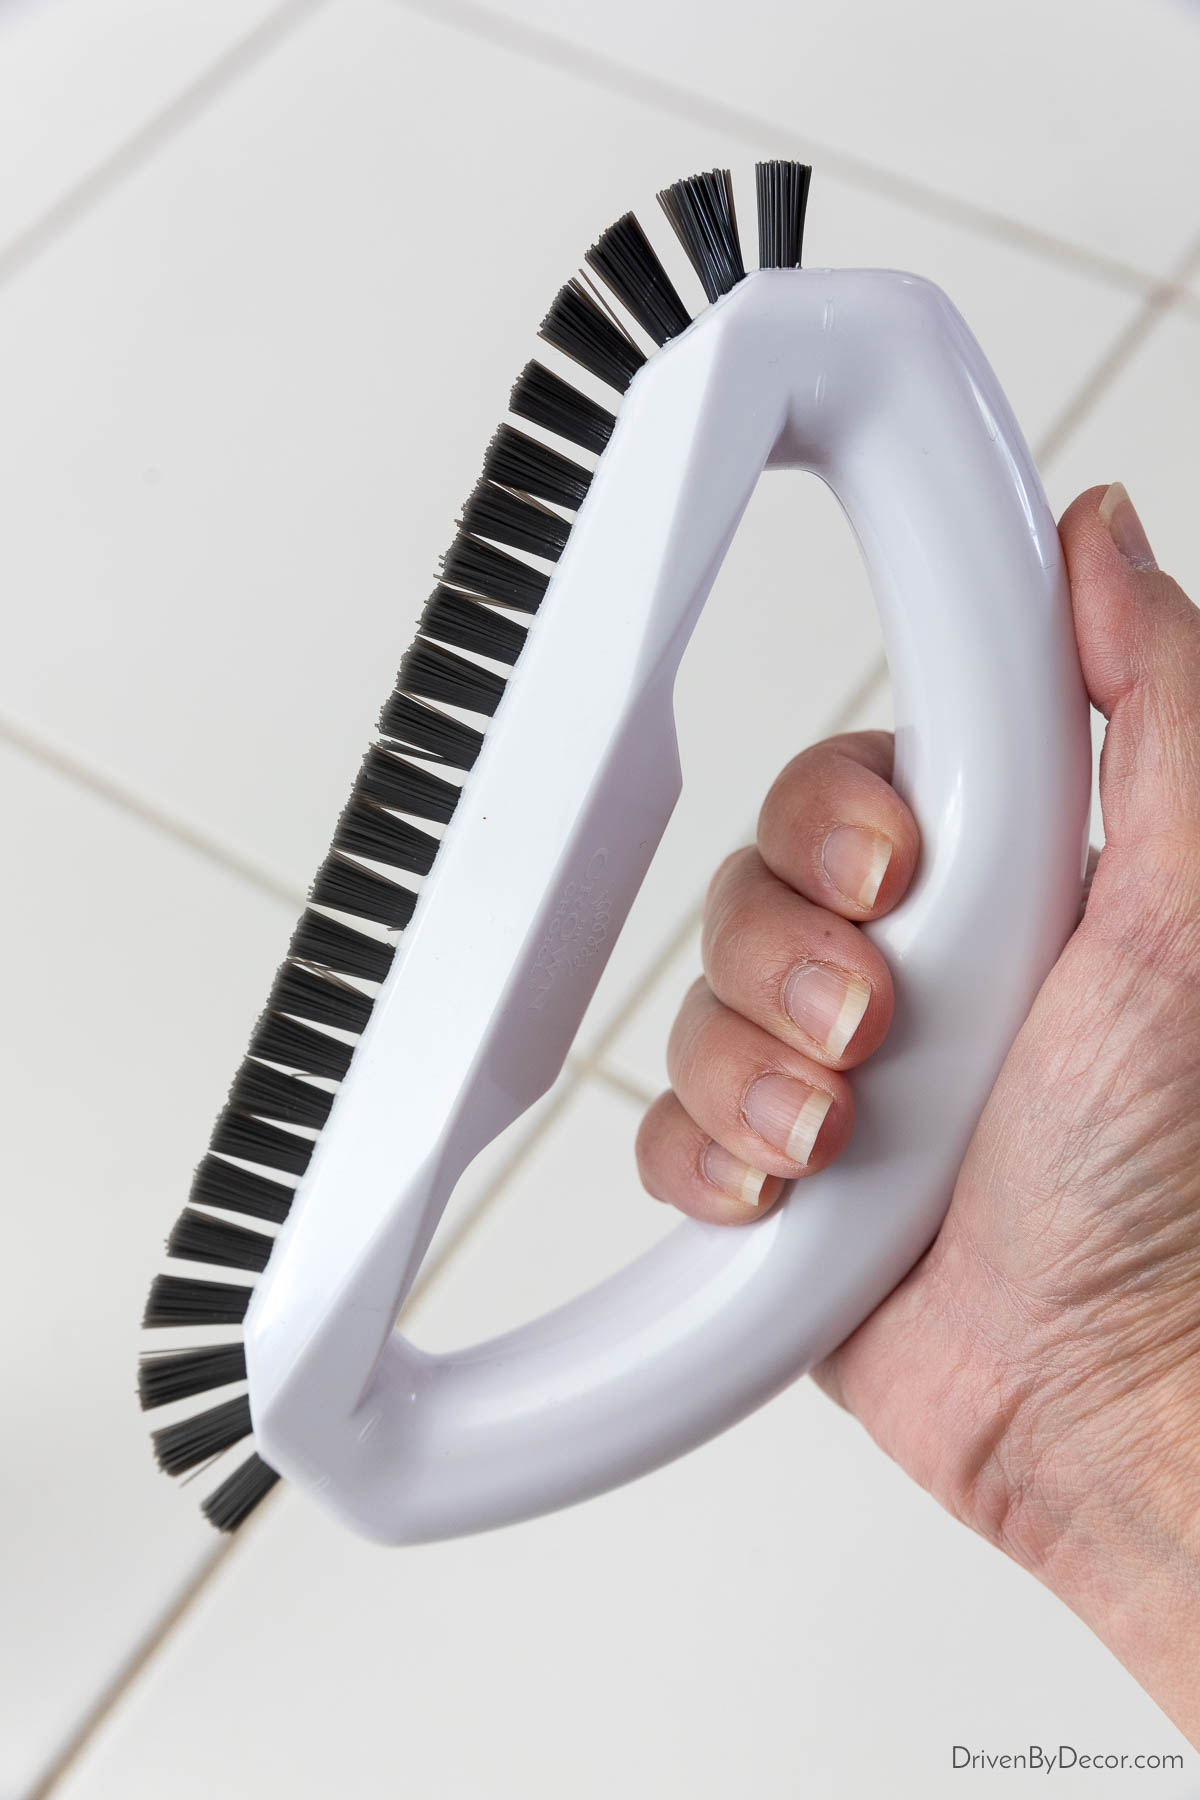 Grout cleaning brush that's great for cleaning corners and edges